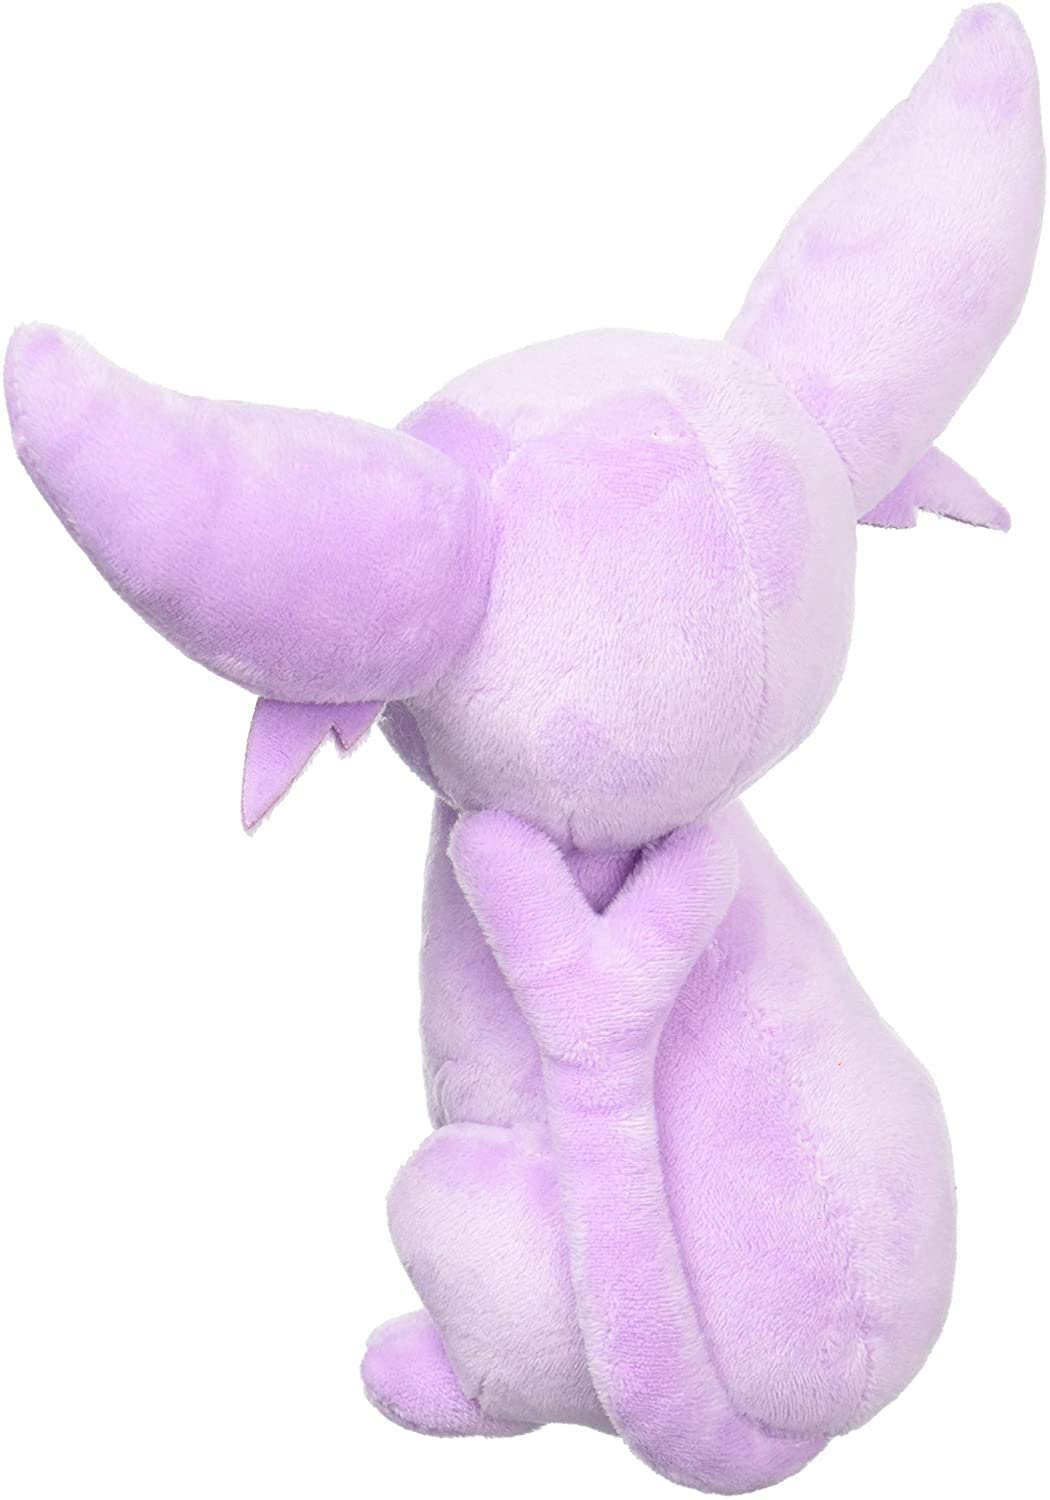 Sanei All Star Collection 6 Inch Plush - Espeon PP121